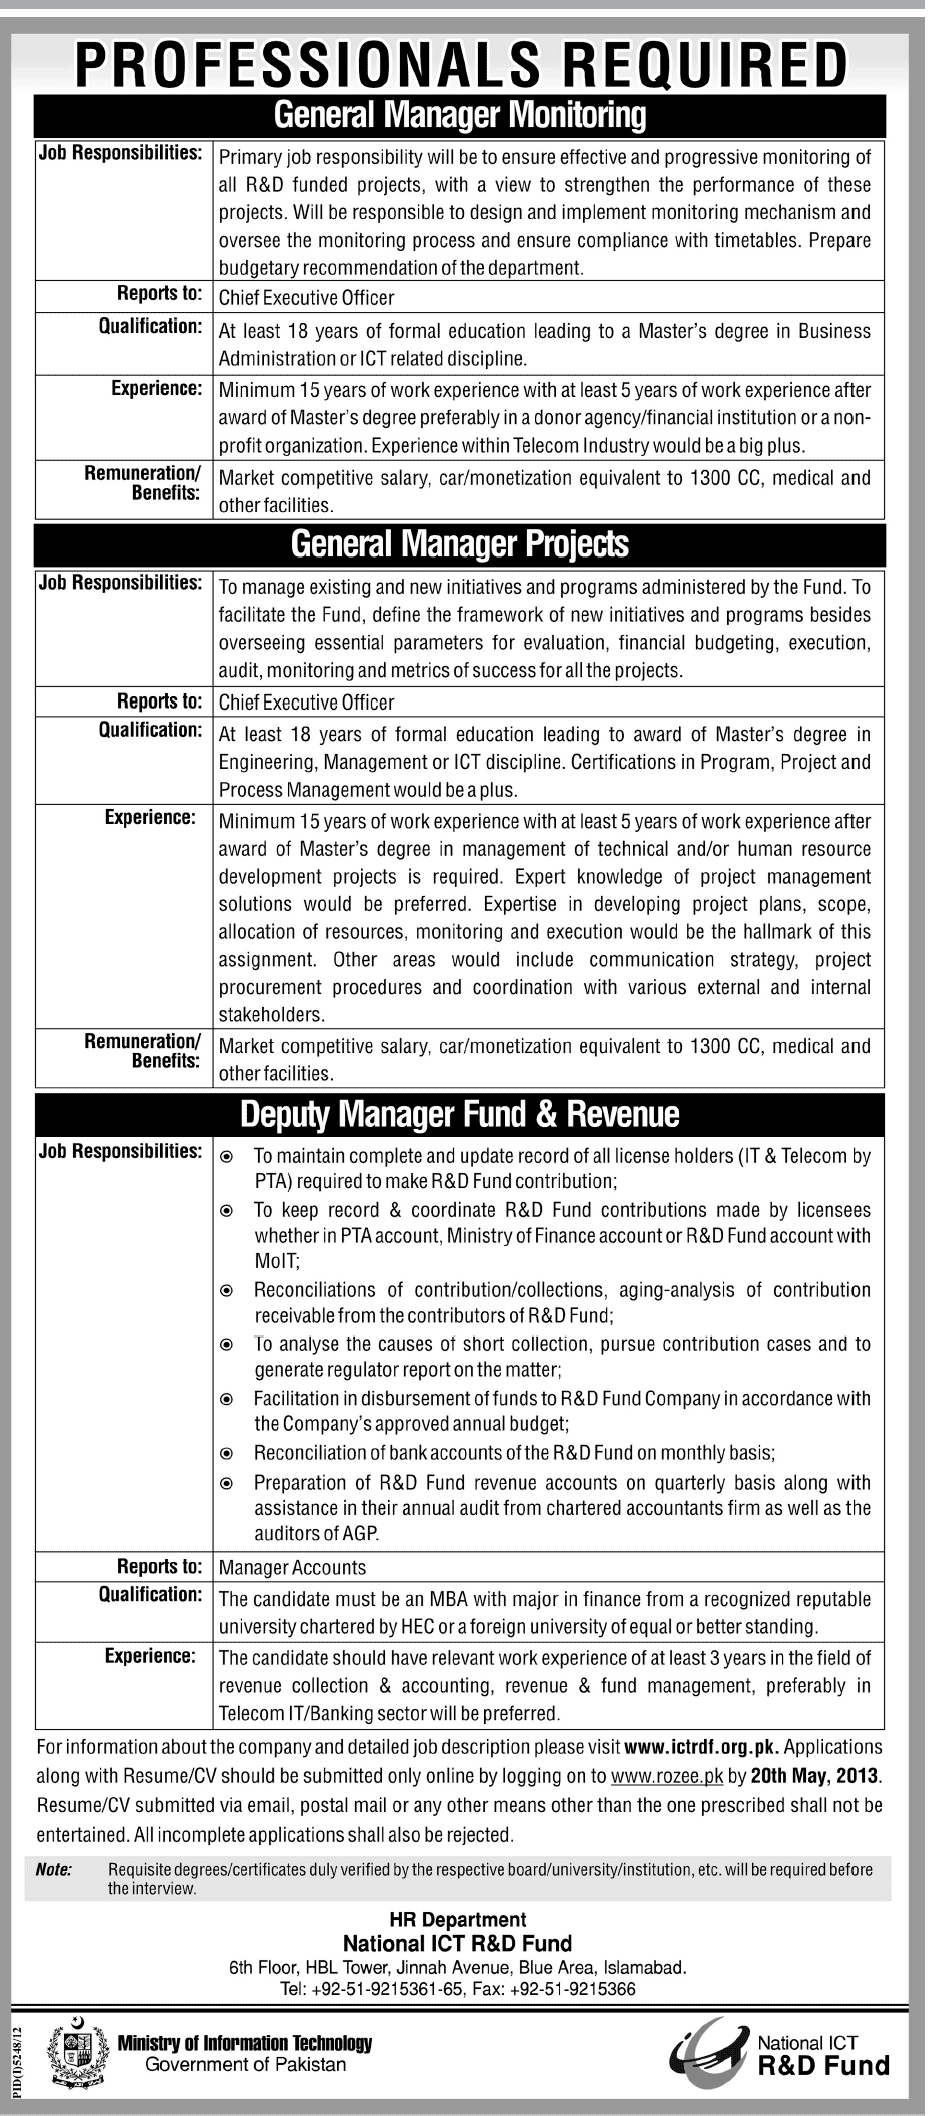 National ICT R&D Fund, Govt of Pakistan Jobs May